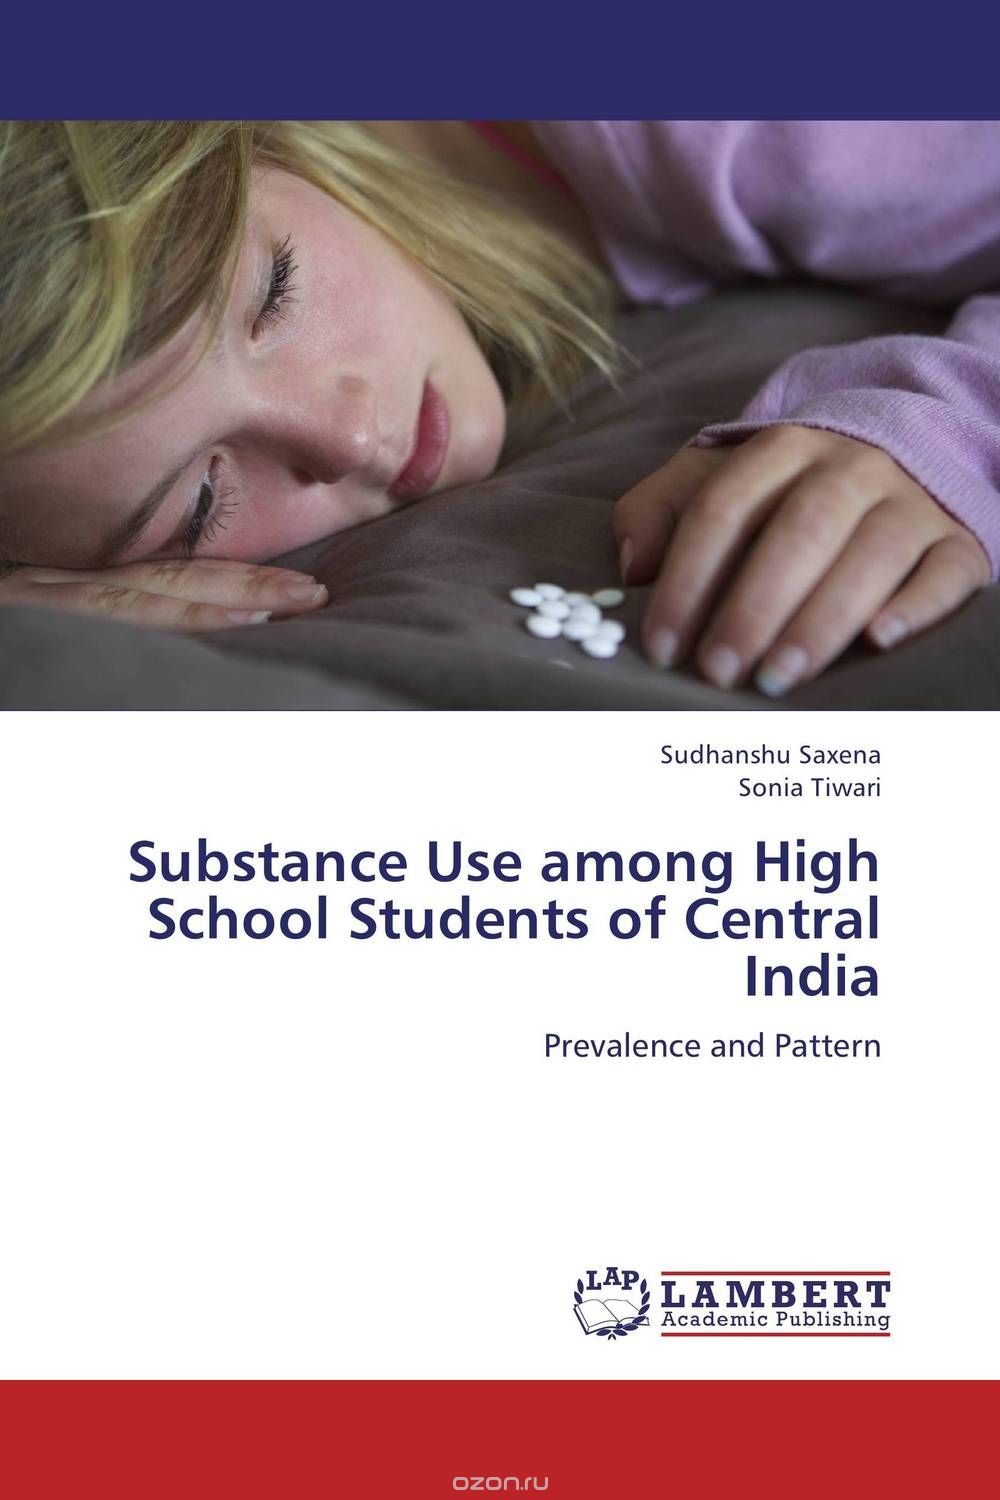 Substance Use among High School Students of Central India